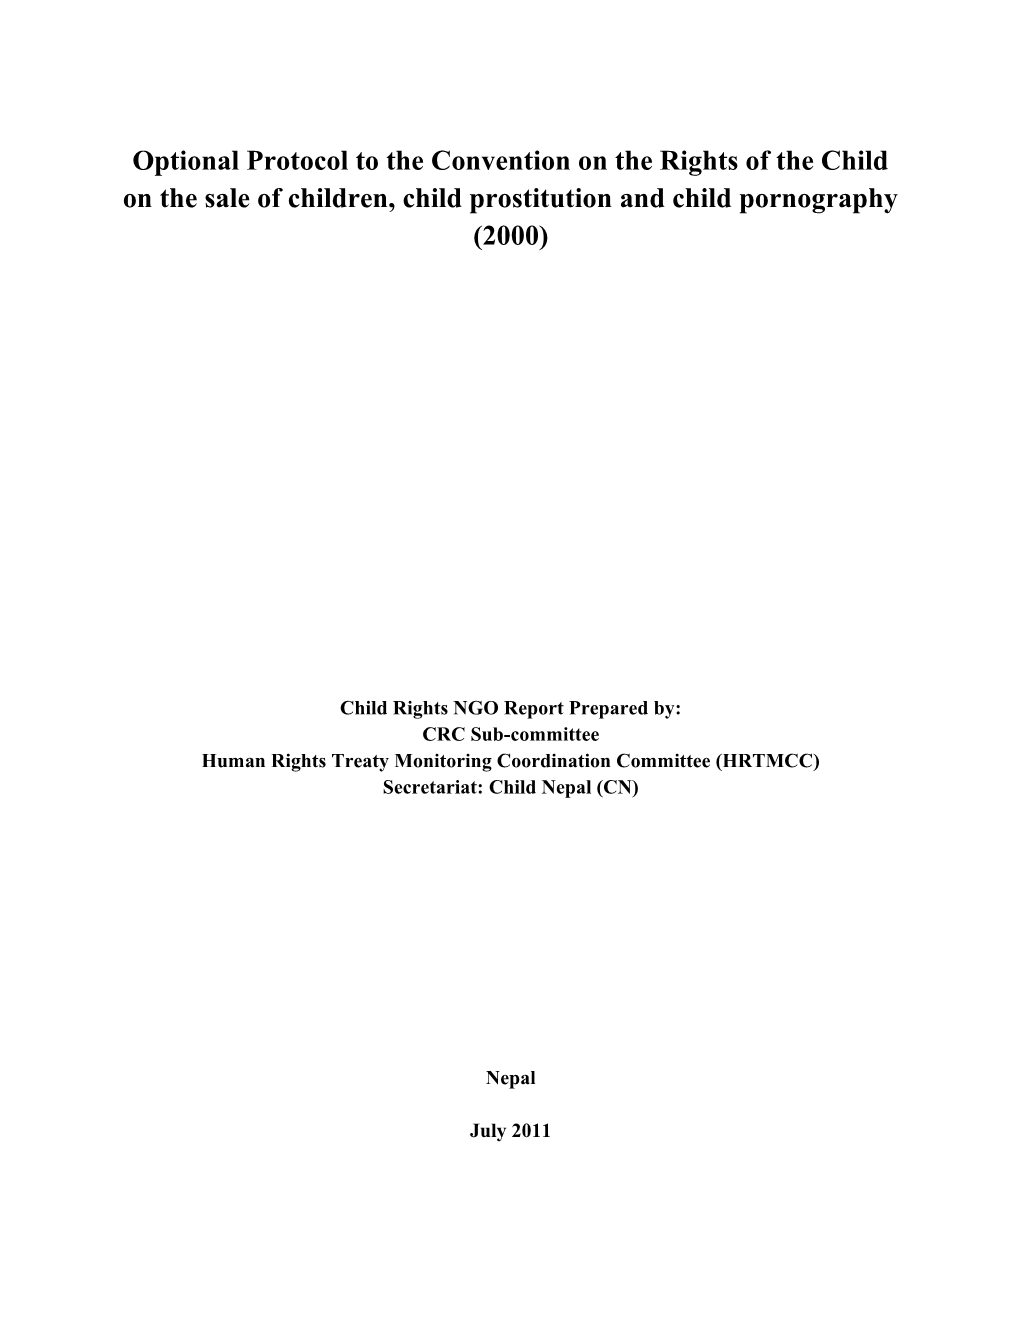 Optional Protocol to the Convention on the Rights of the Child on the Sale of Children